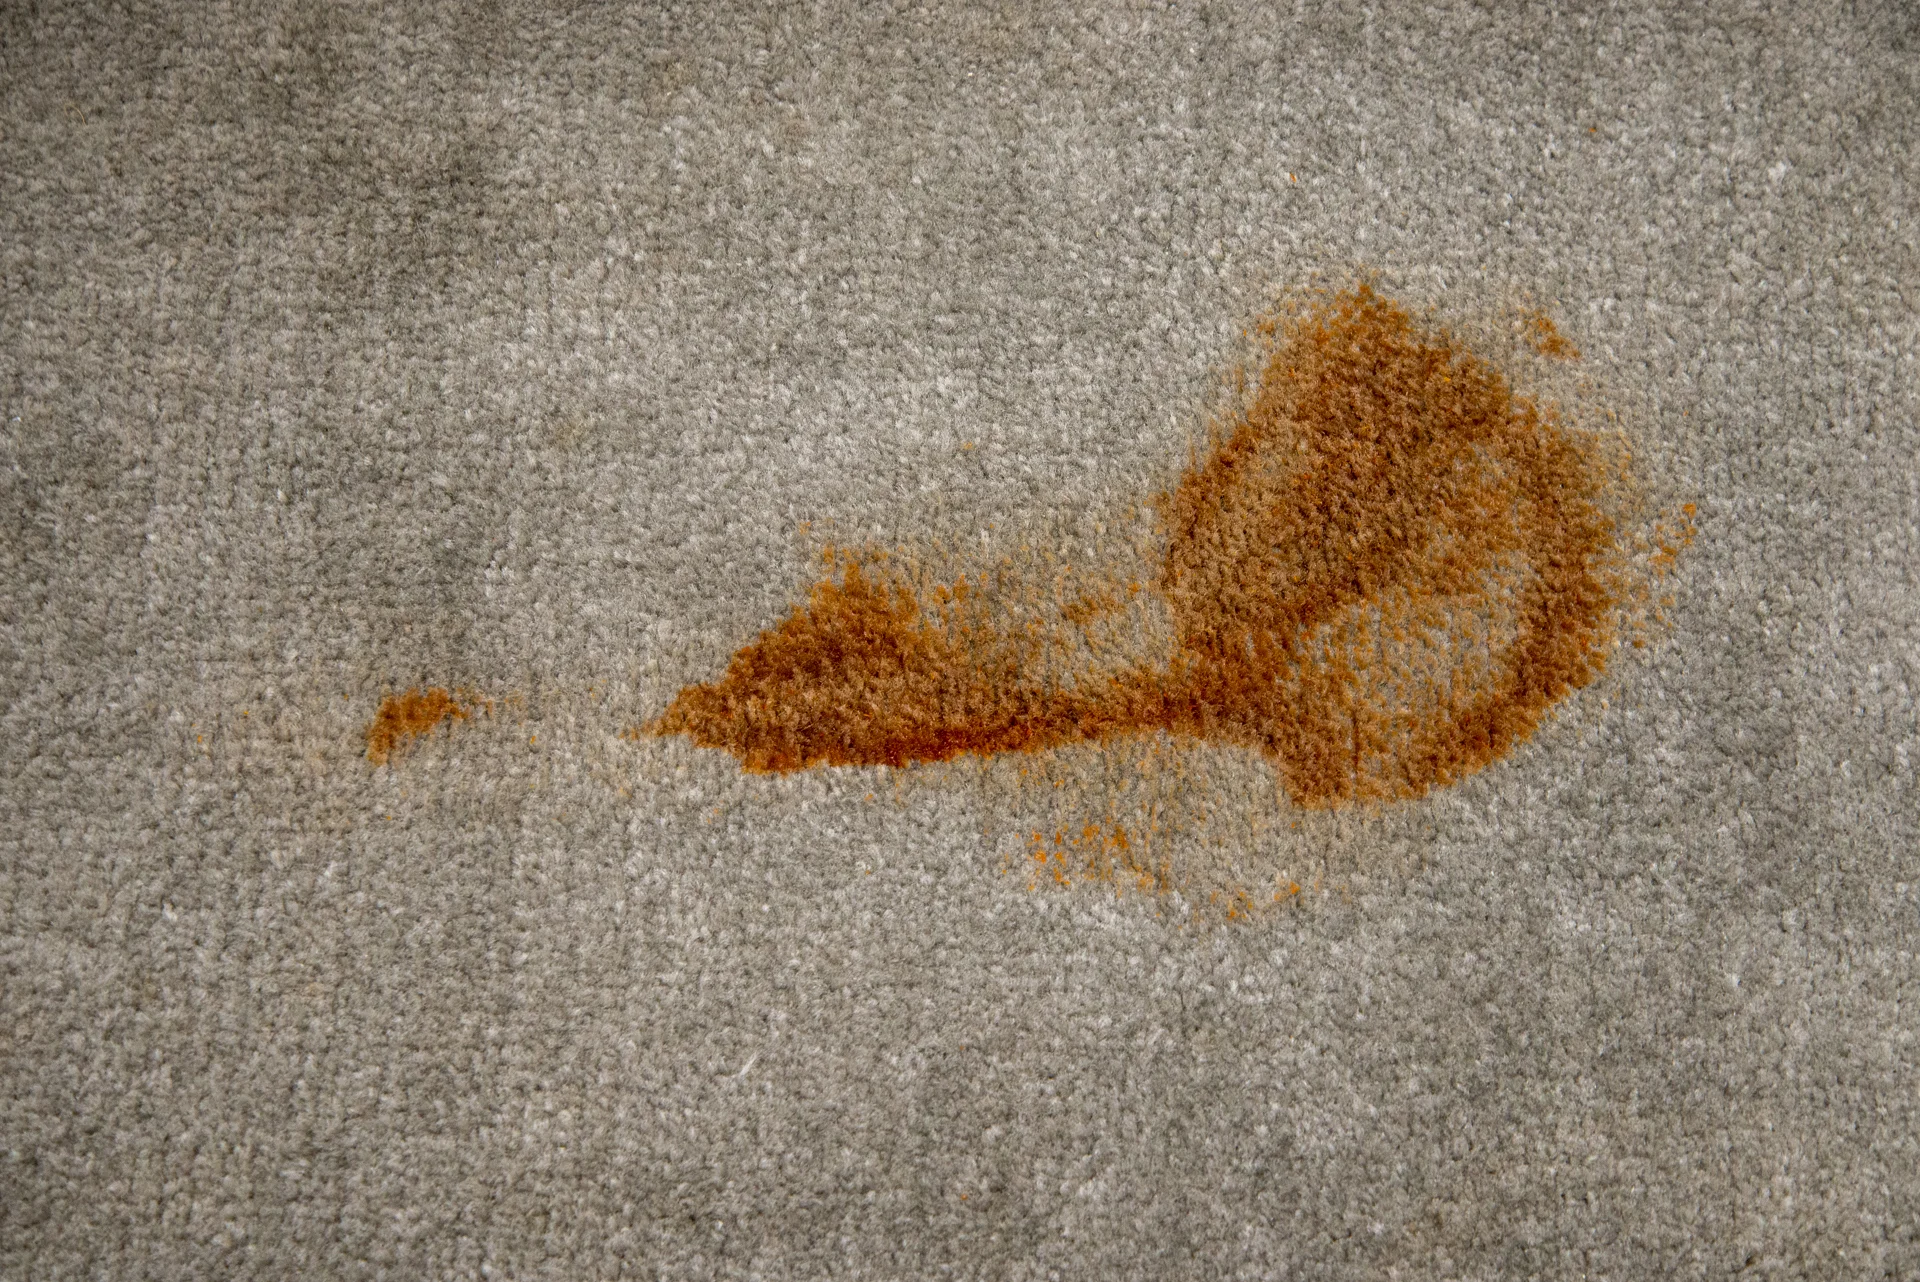 How To Get Ink Stains Out Of Carpet